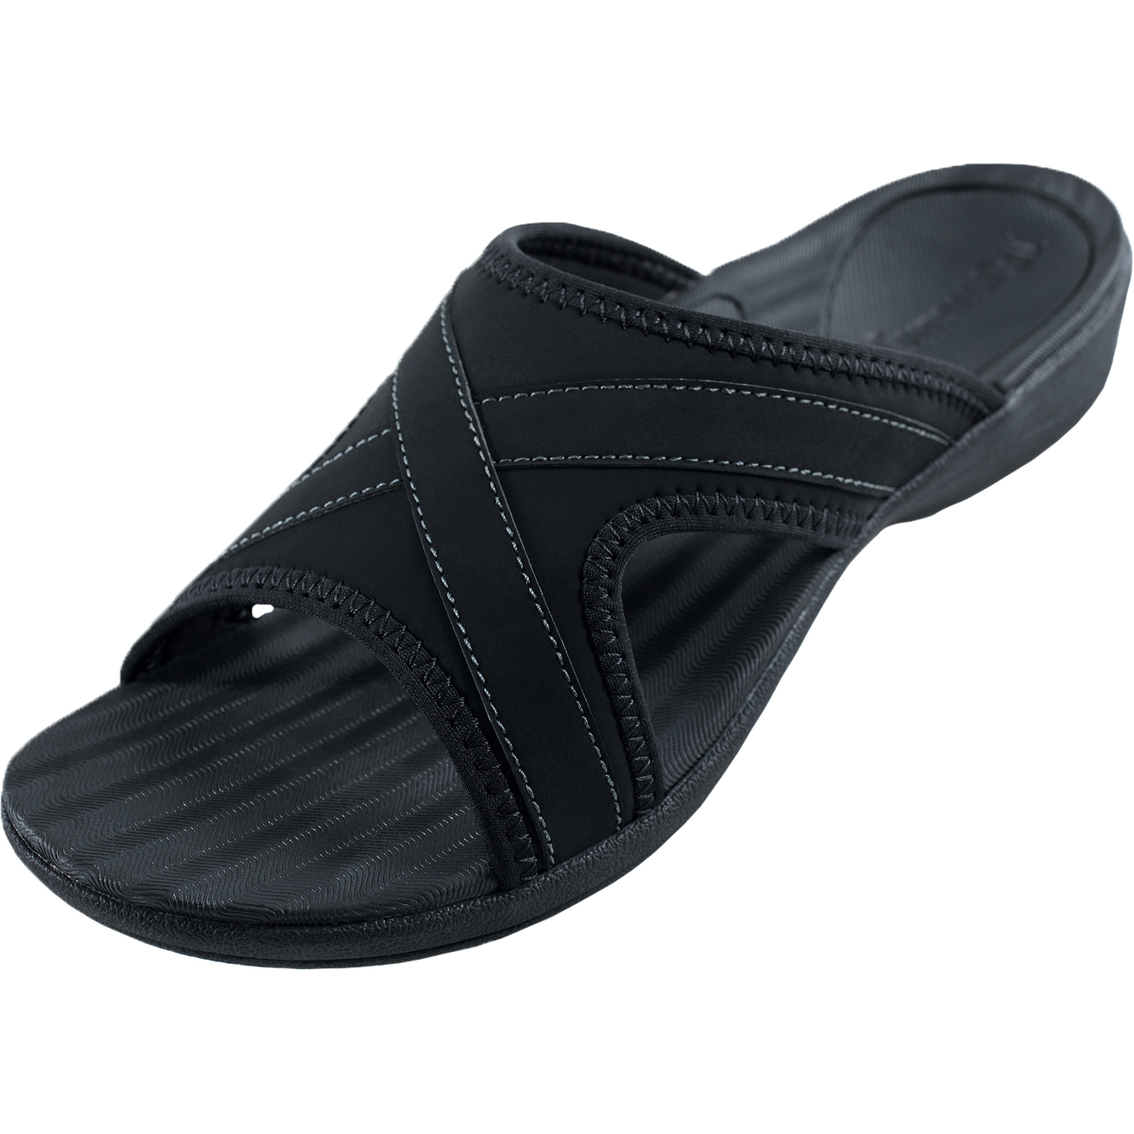 Powerstep Women/'s Fusion Recovery Slide Sandal